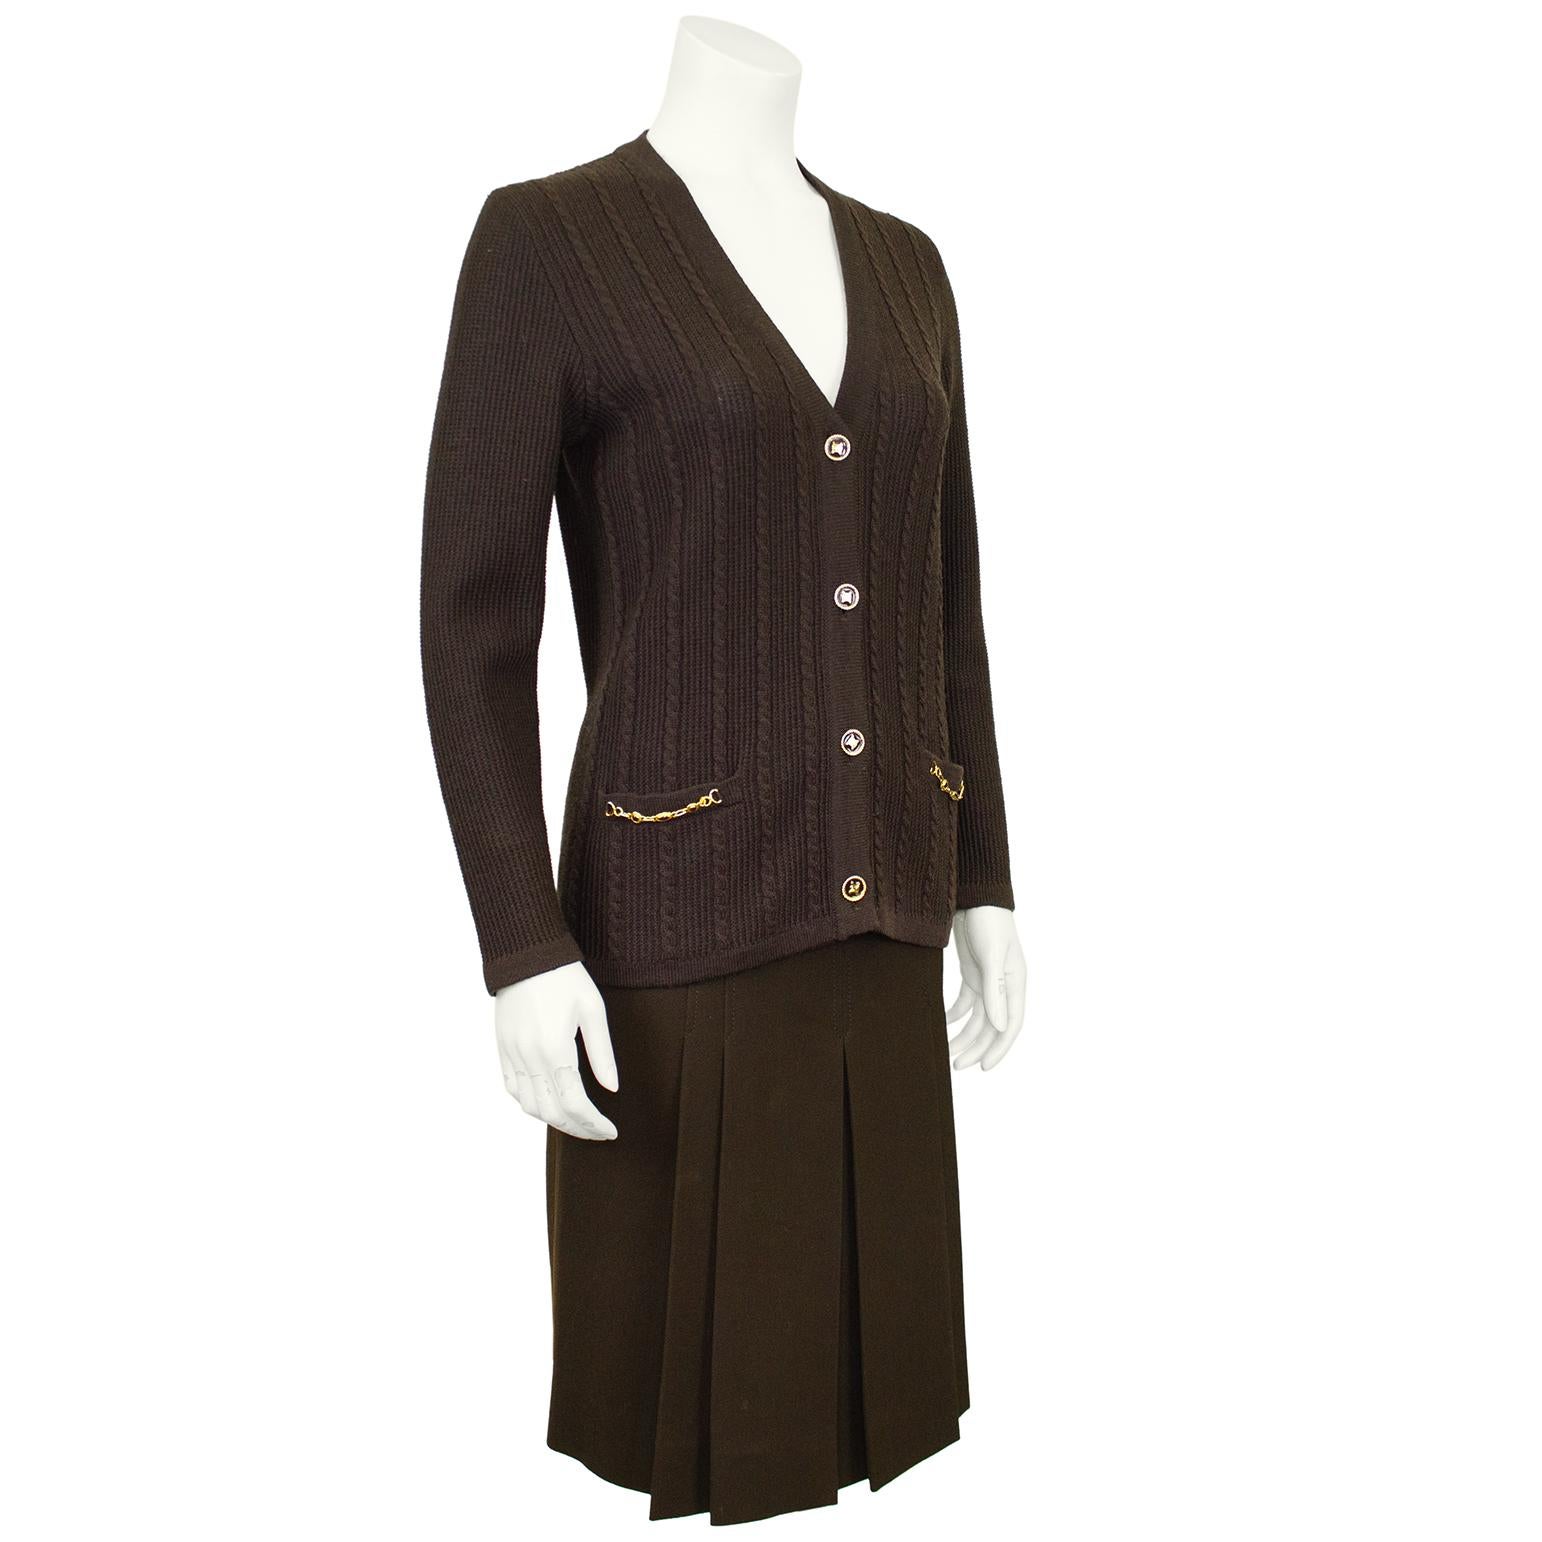 Classic and timeless Celine 100% wool chocolate brown cardigan and matching gabardine skirt ensemble from the 1970's. A cable knit cardigan with gold tone metal chain accents at the pocket and beautiful gold tone and brown enamel logo buttons. The